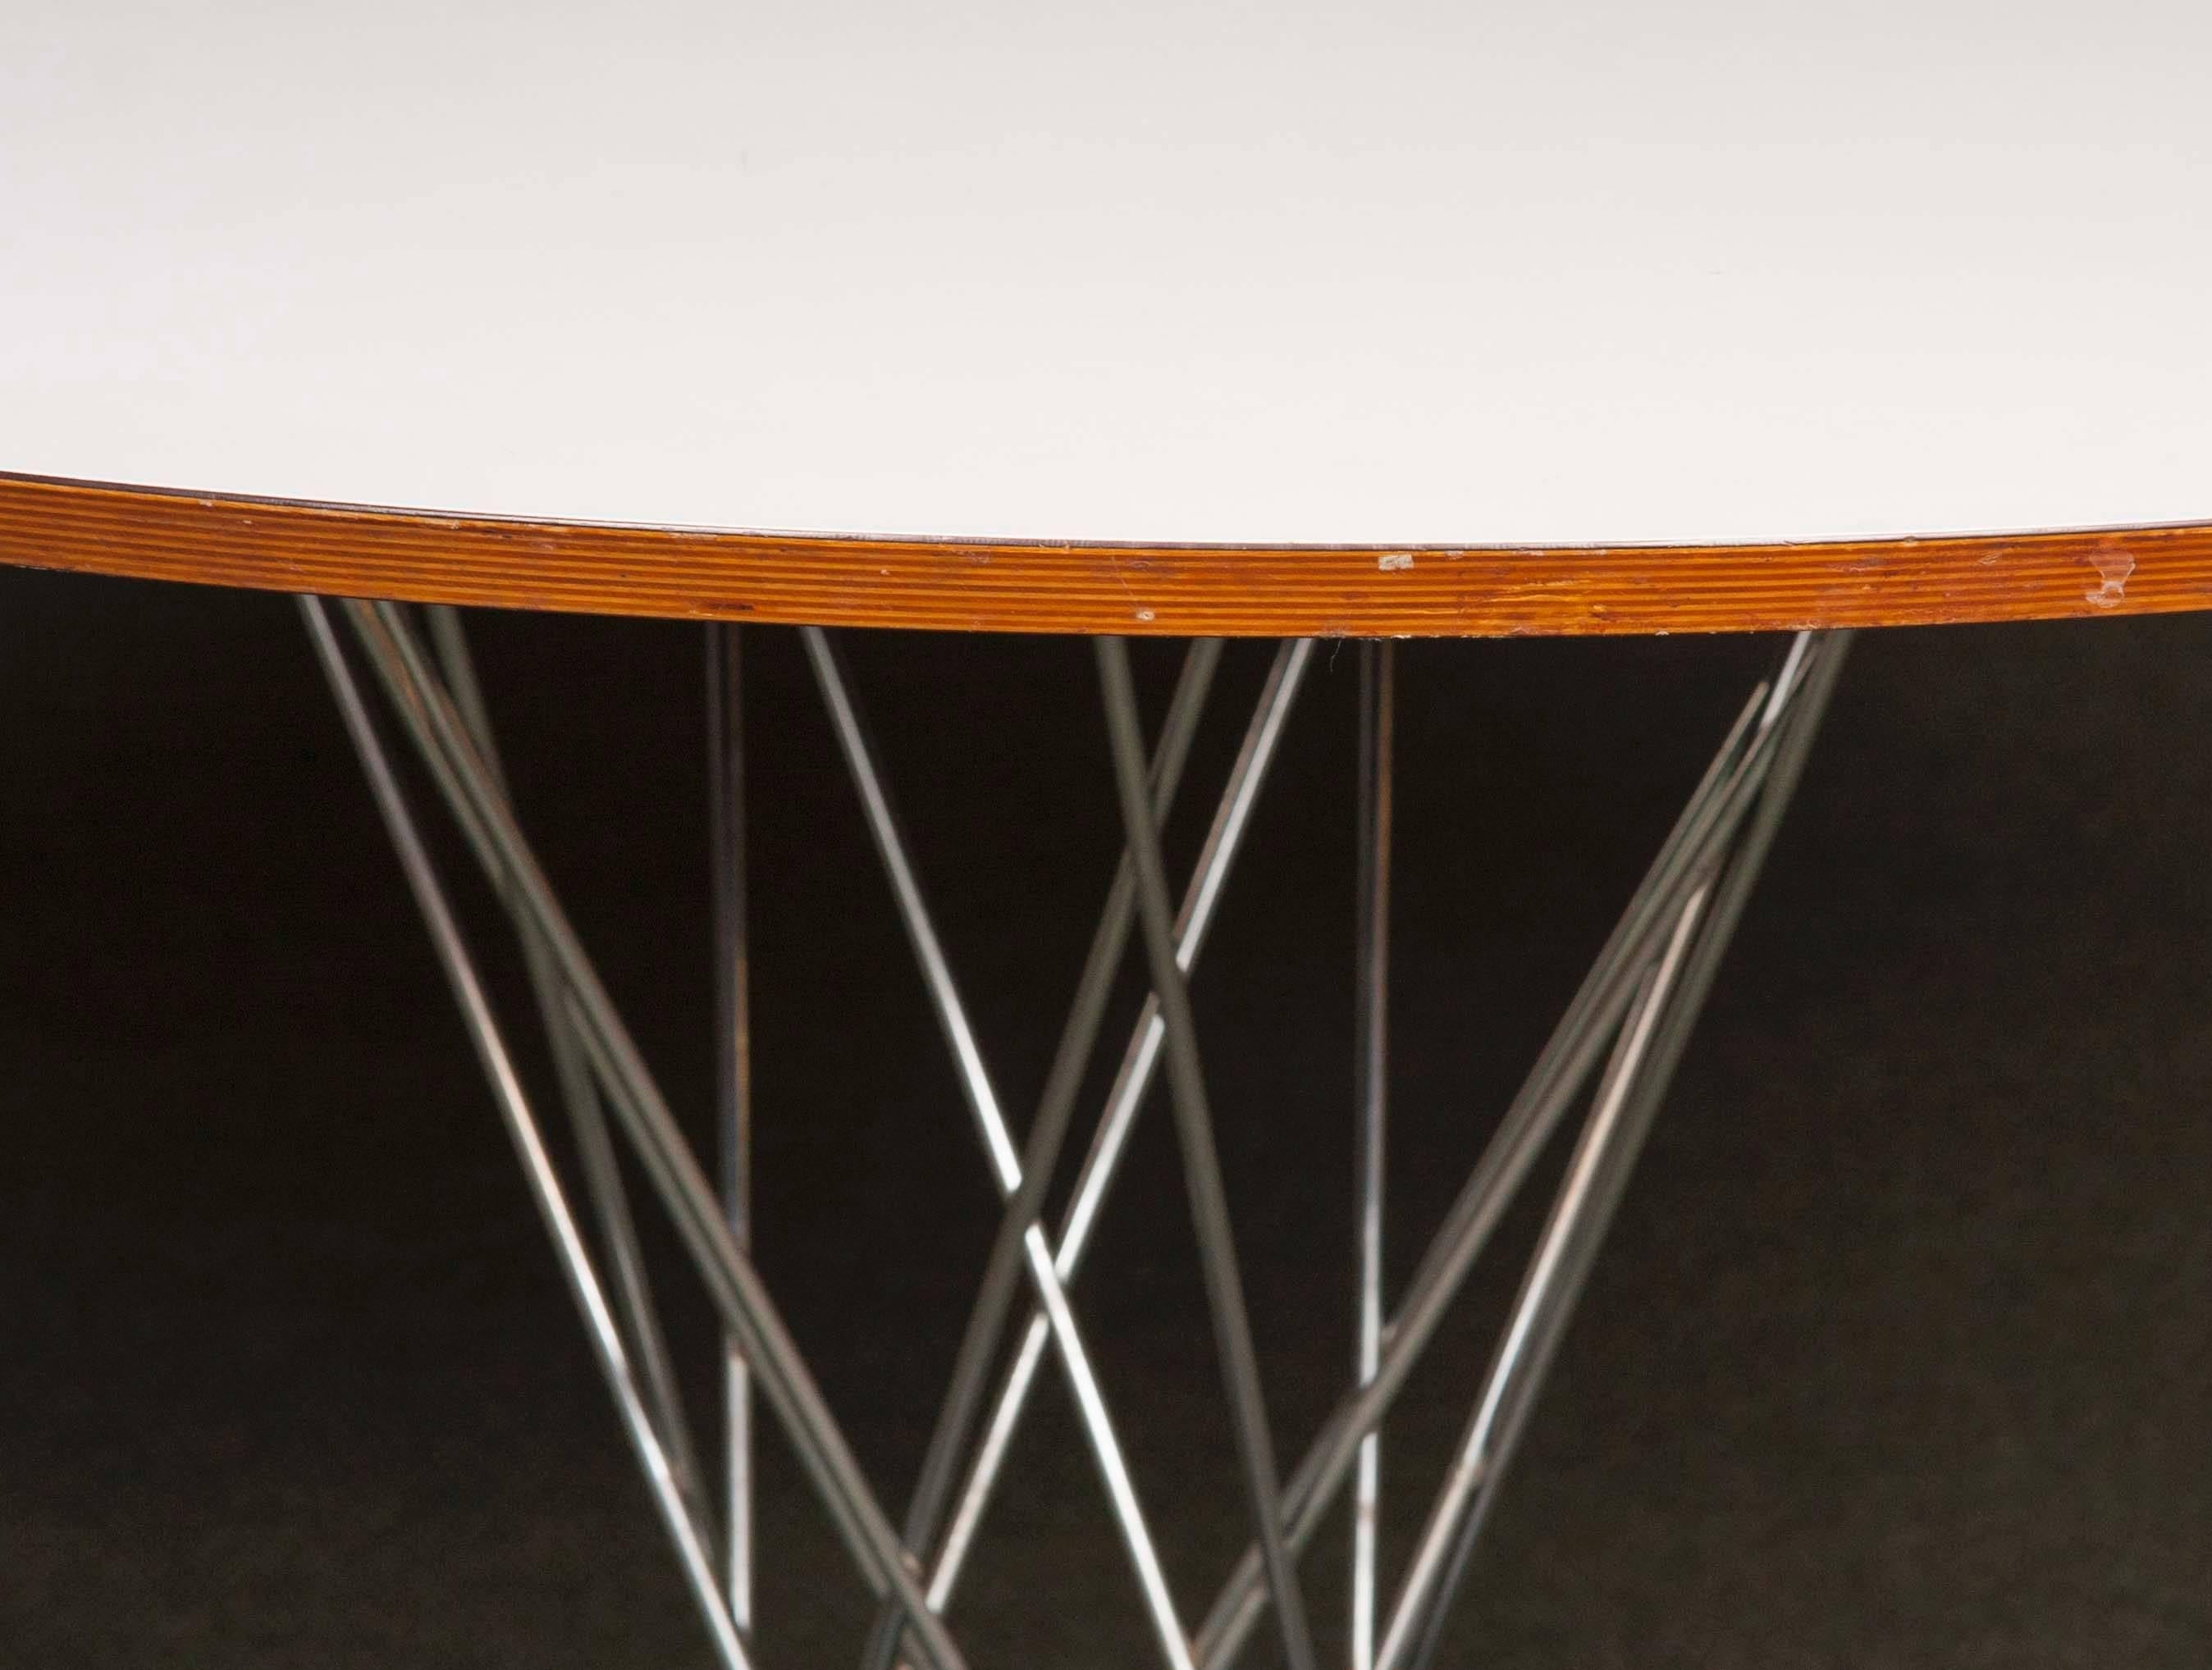 Plywood “Cyclone” Table by the Famed Mid-Century Designer Isamu Noguchi for Knoll